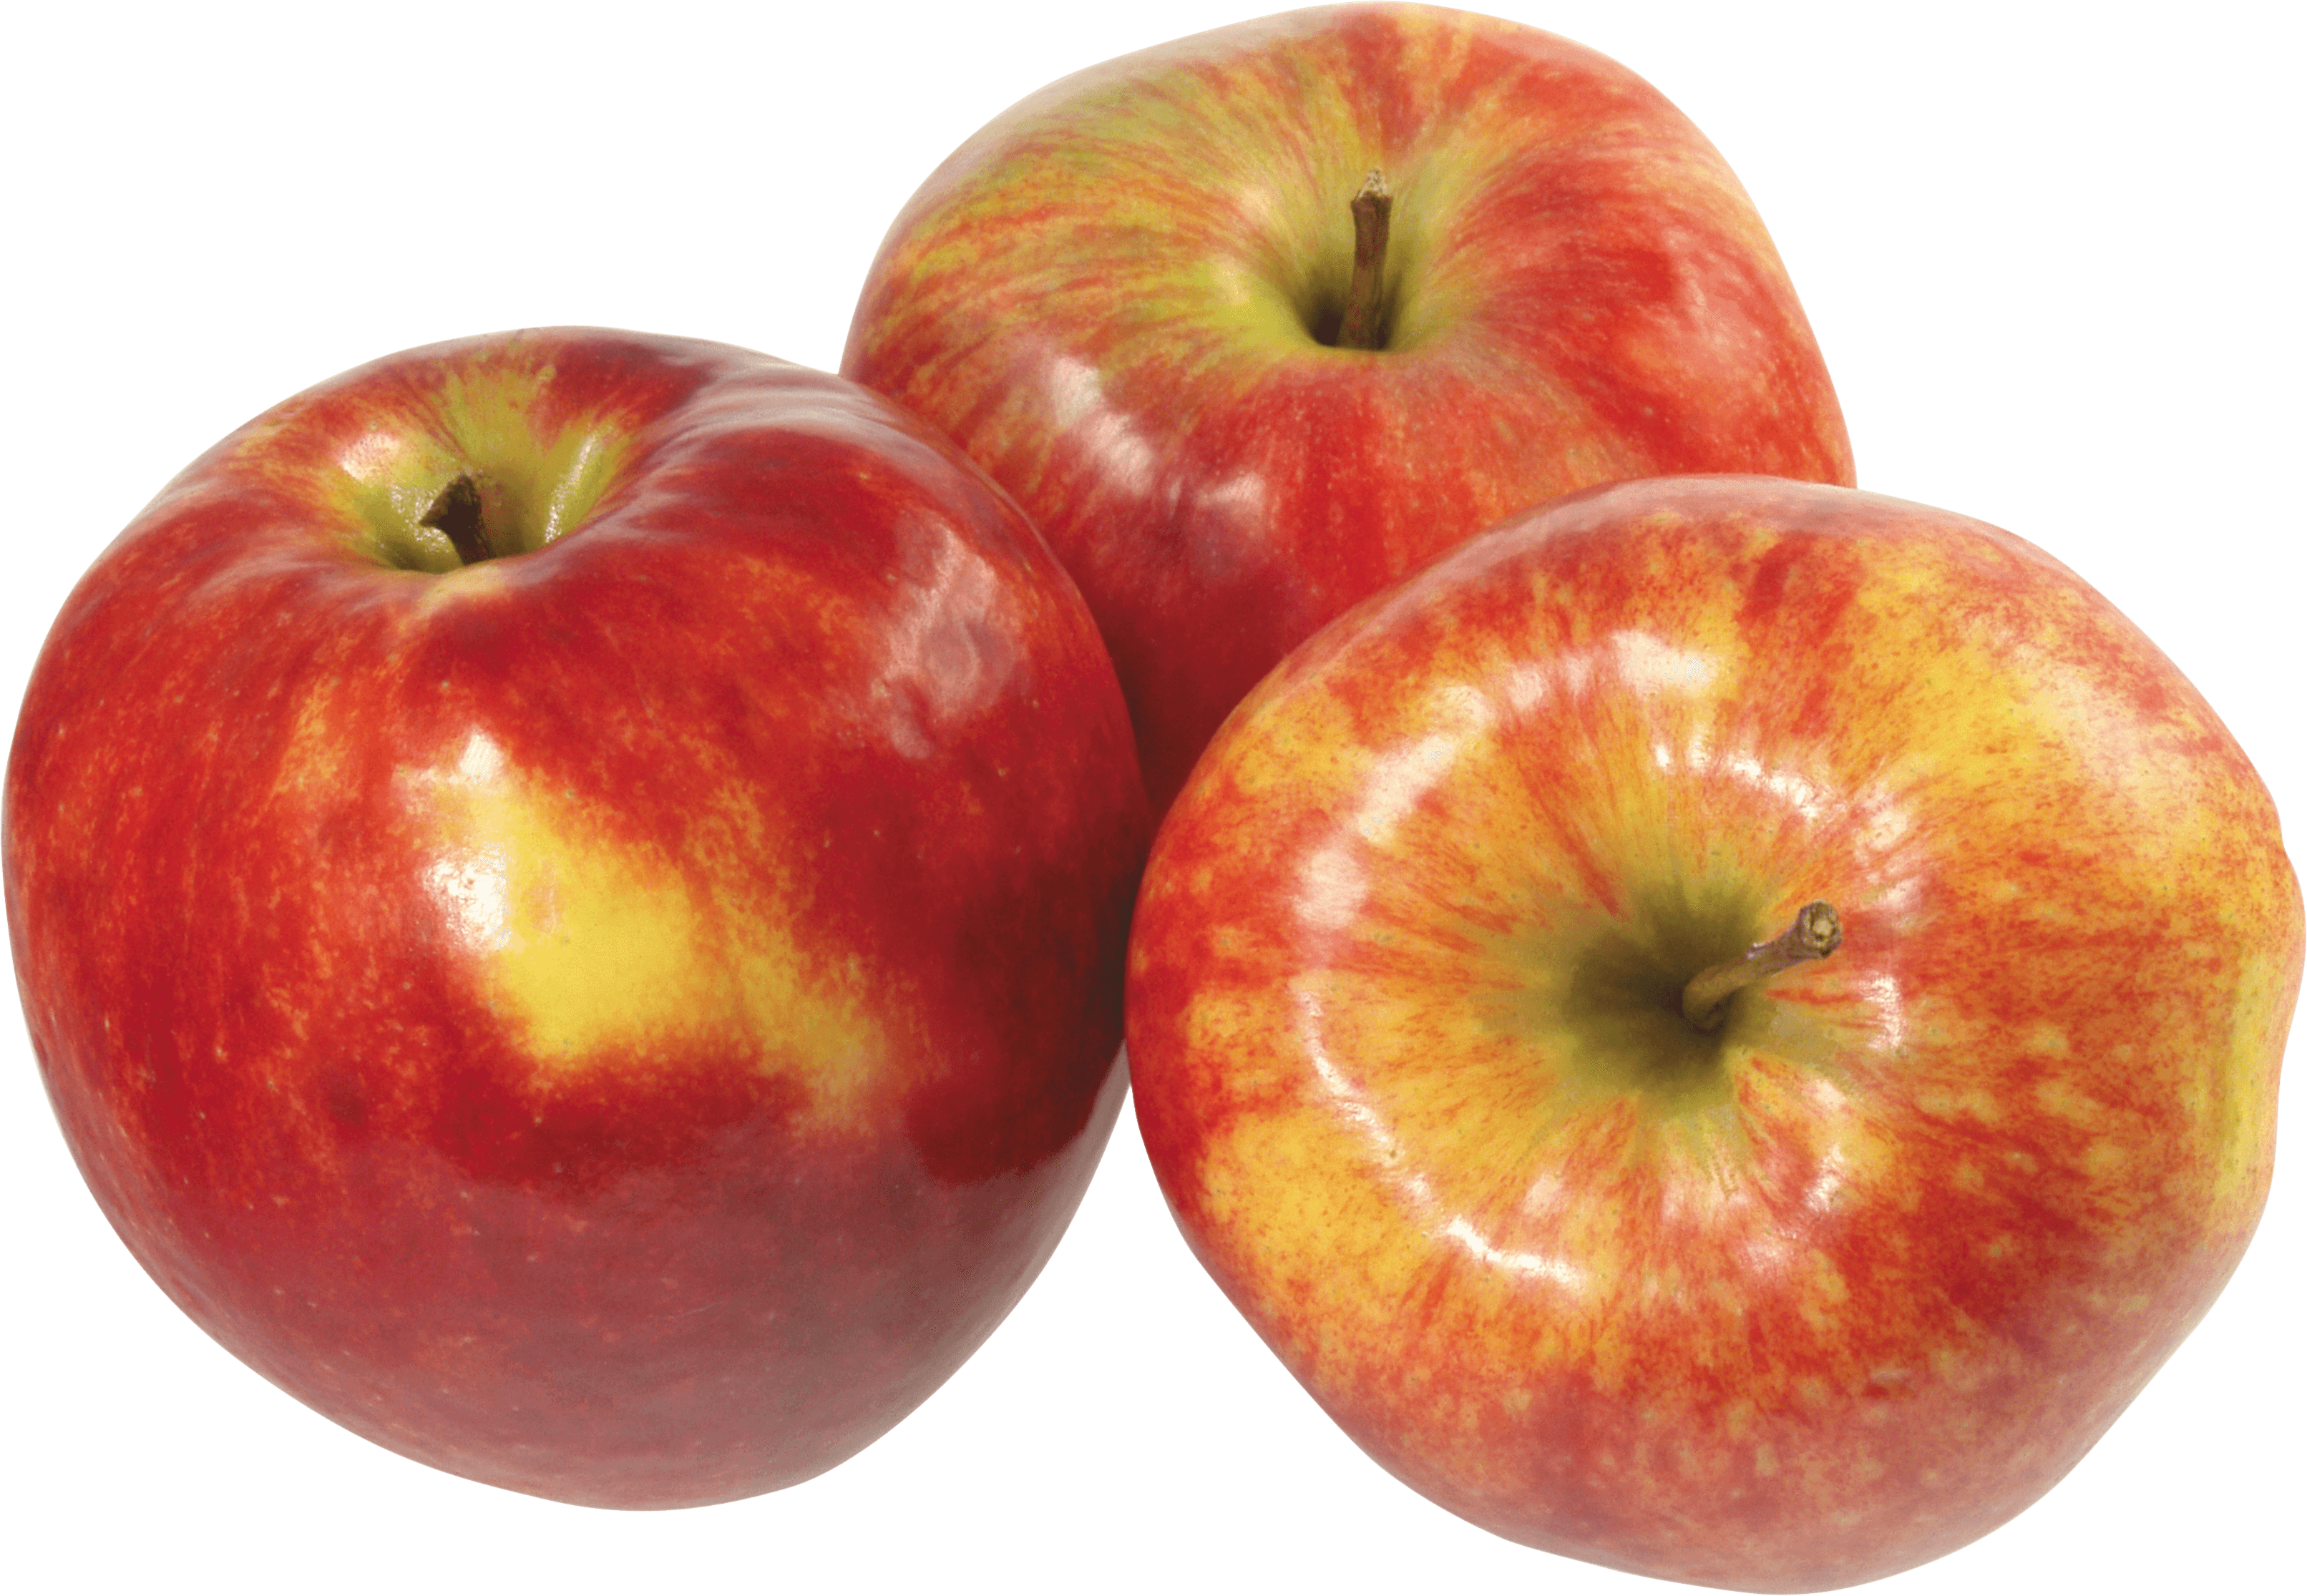 Apple Png Image PNG Image